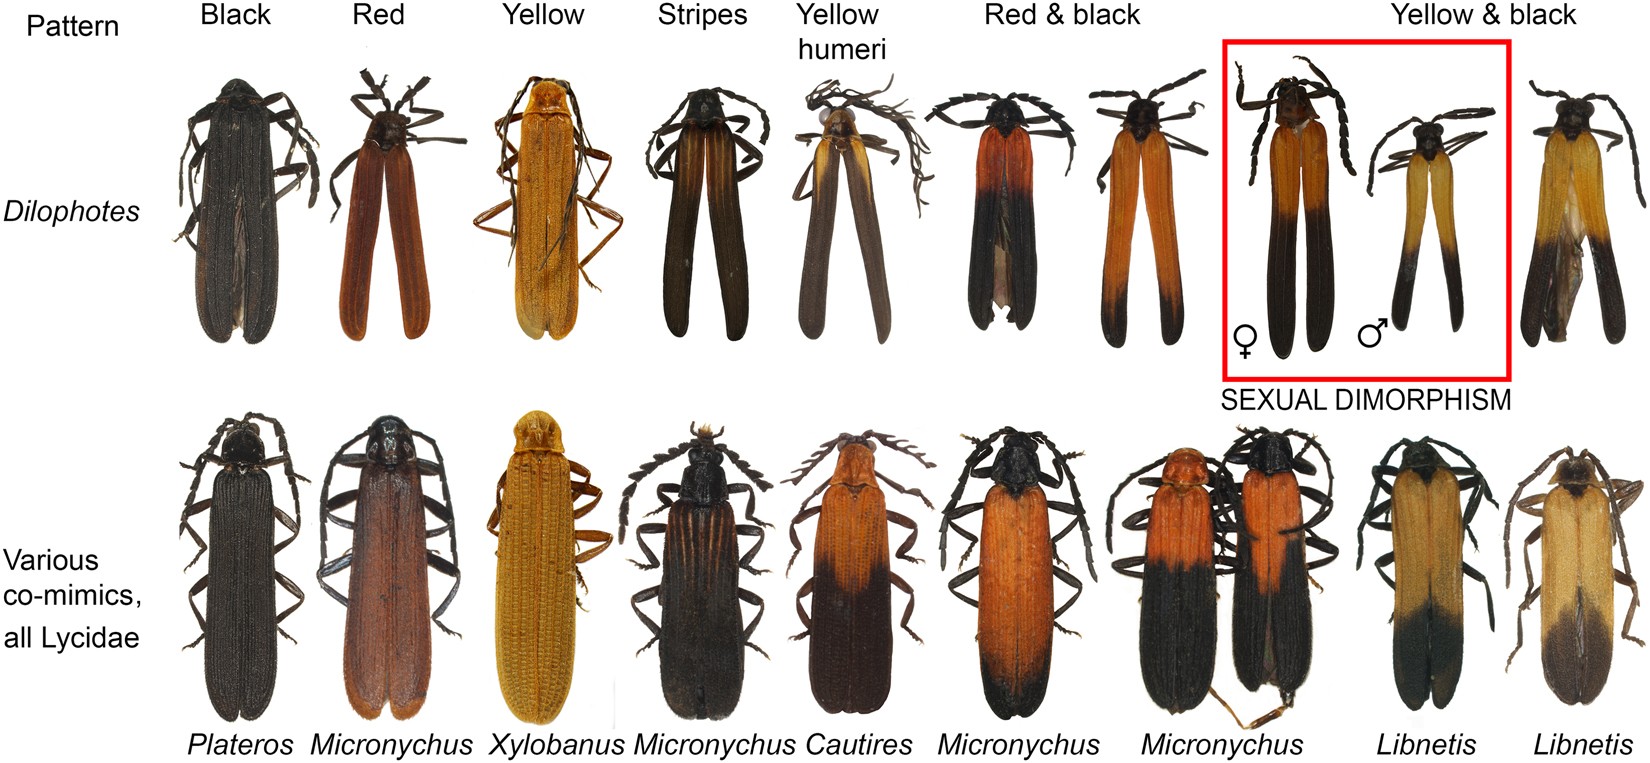 Phylogeny and evolution of Müllerian mimicry in aposematic Dilophotes:  evidence for advergence and size-constraints in evolution of mimetic sexual  dimorphism | Scientific Reports